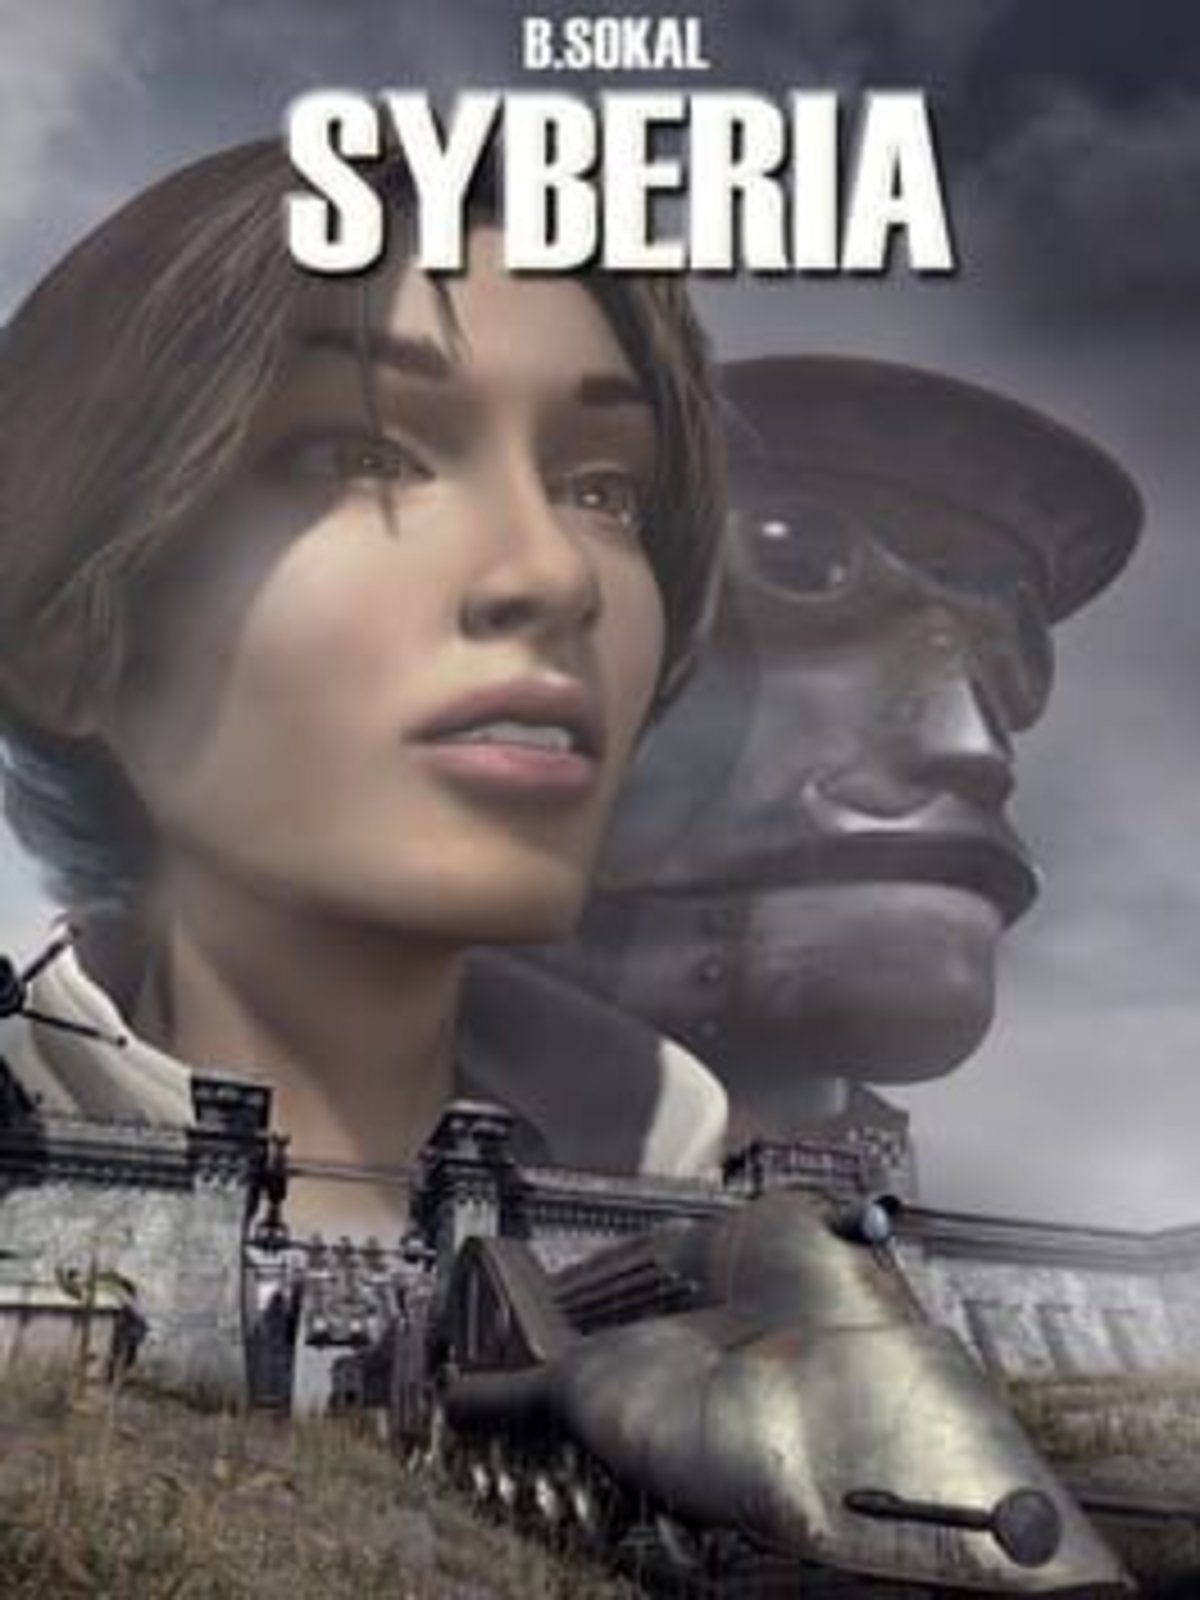 Syberia and Syberia II, free on Steam until September 29